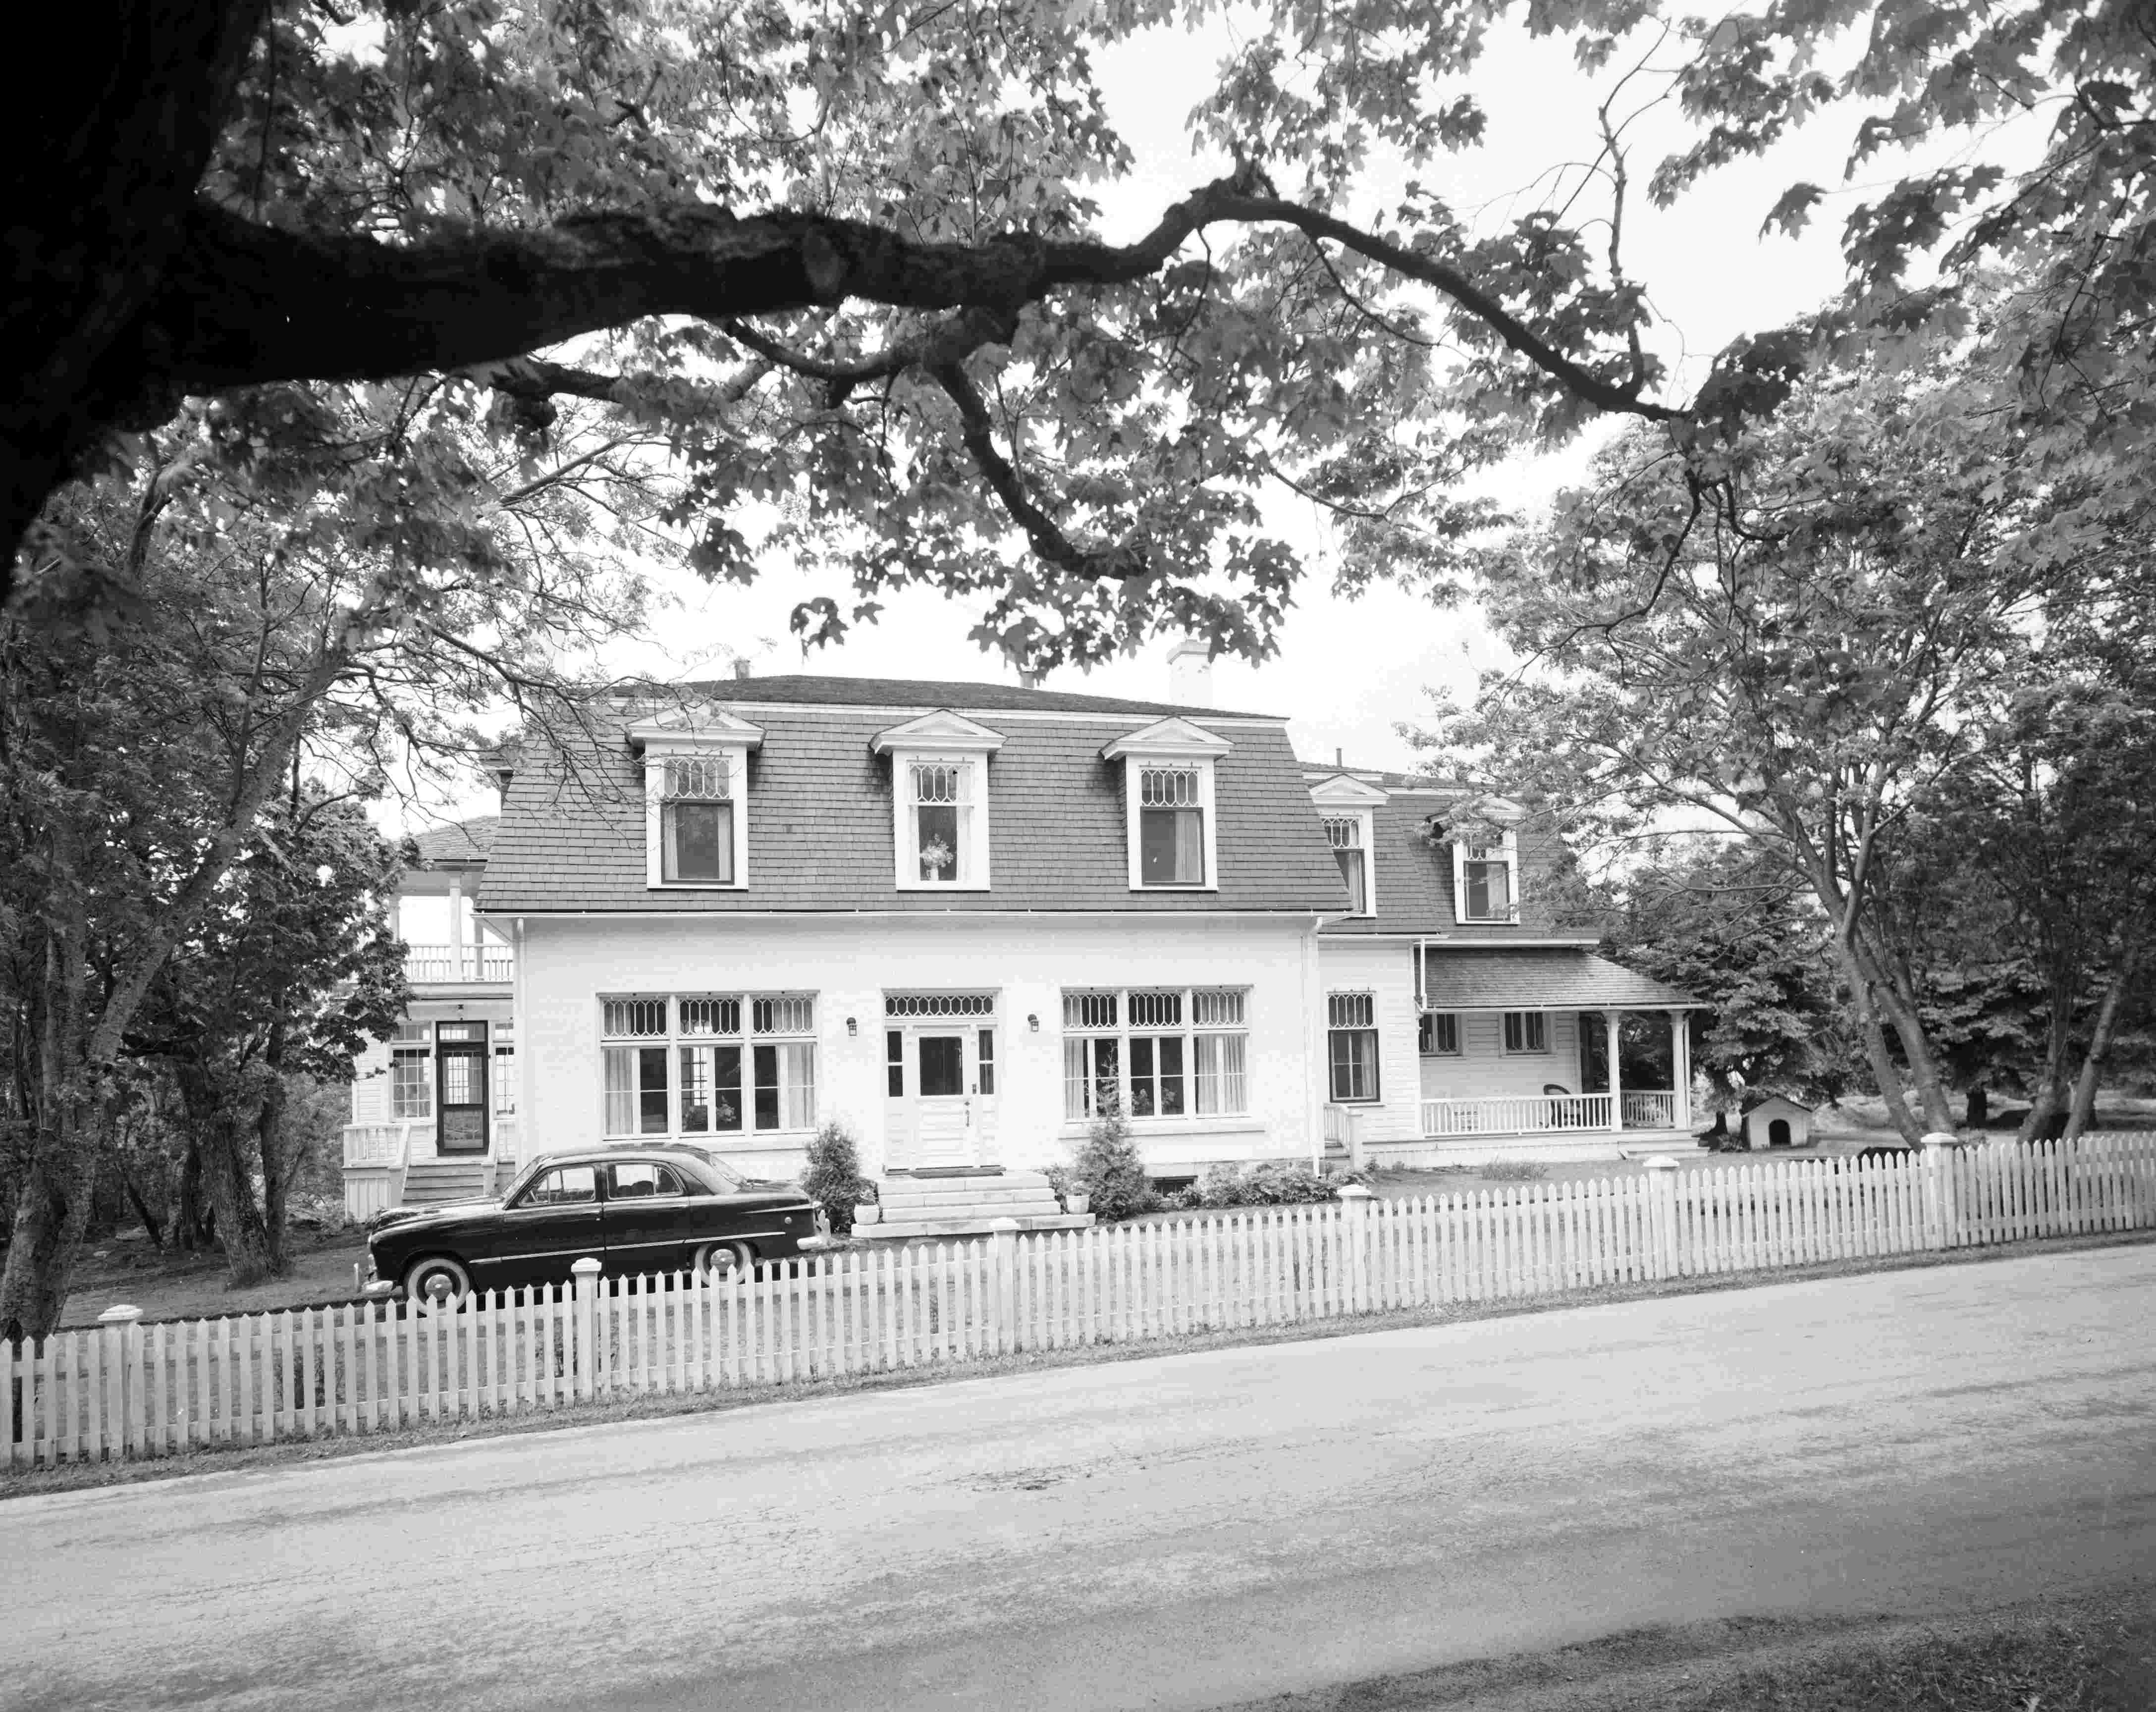 A white house with a mansard roof near a dirt road, with an automobile parked out front.